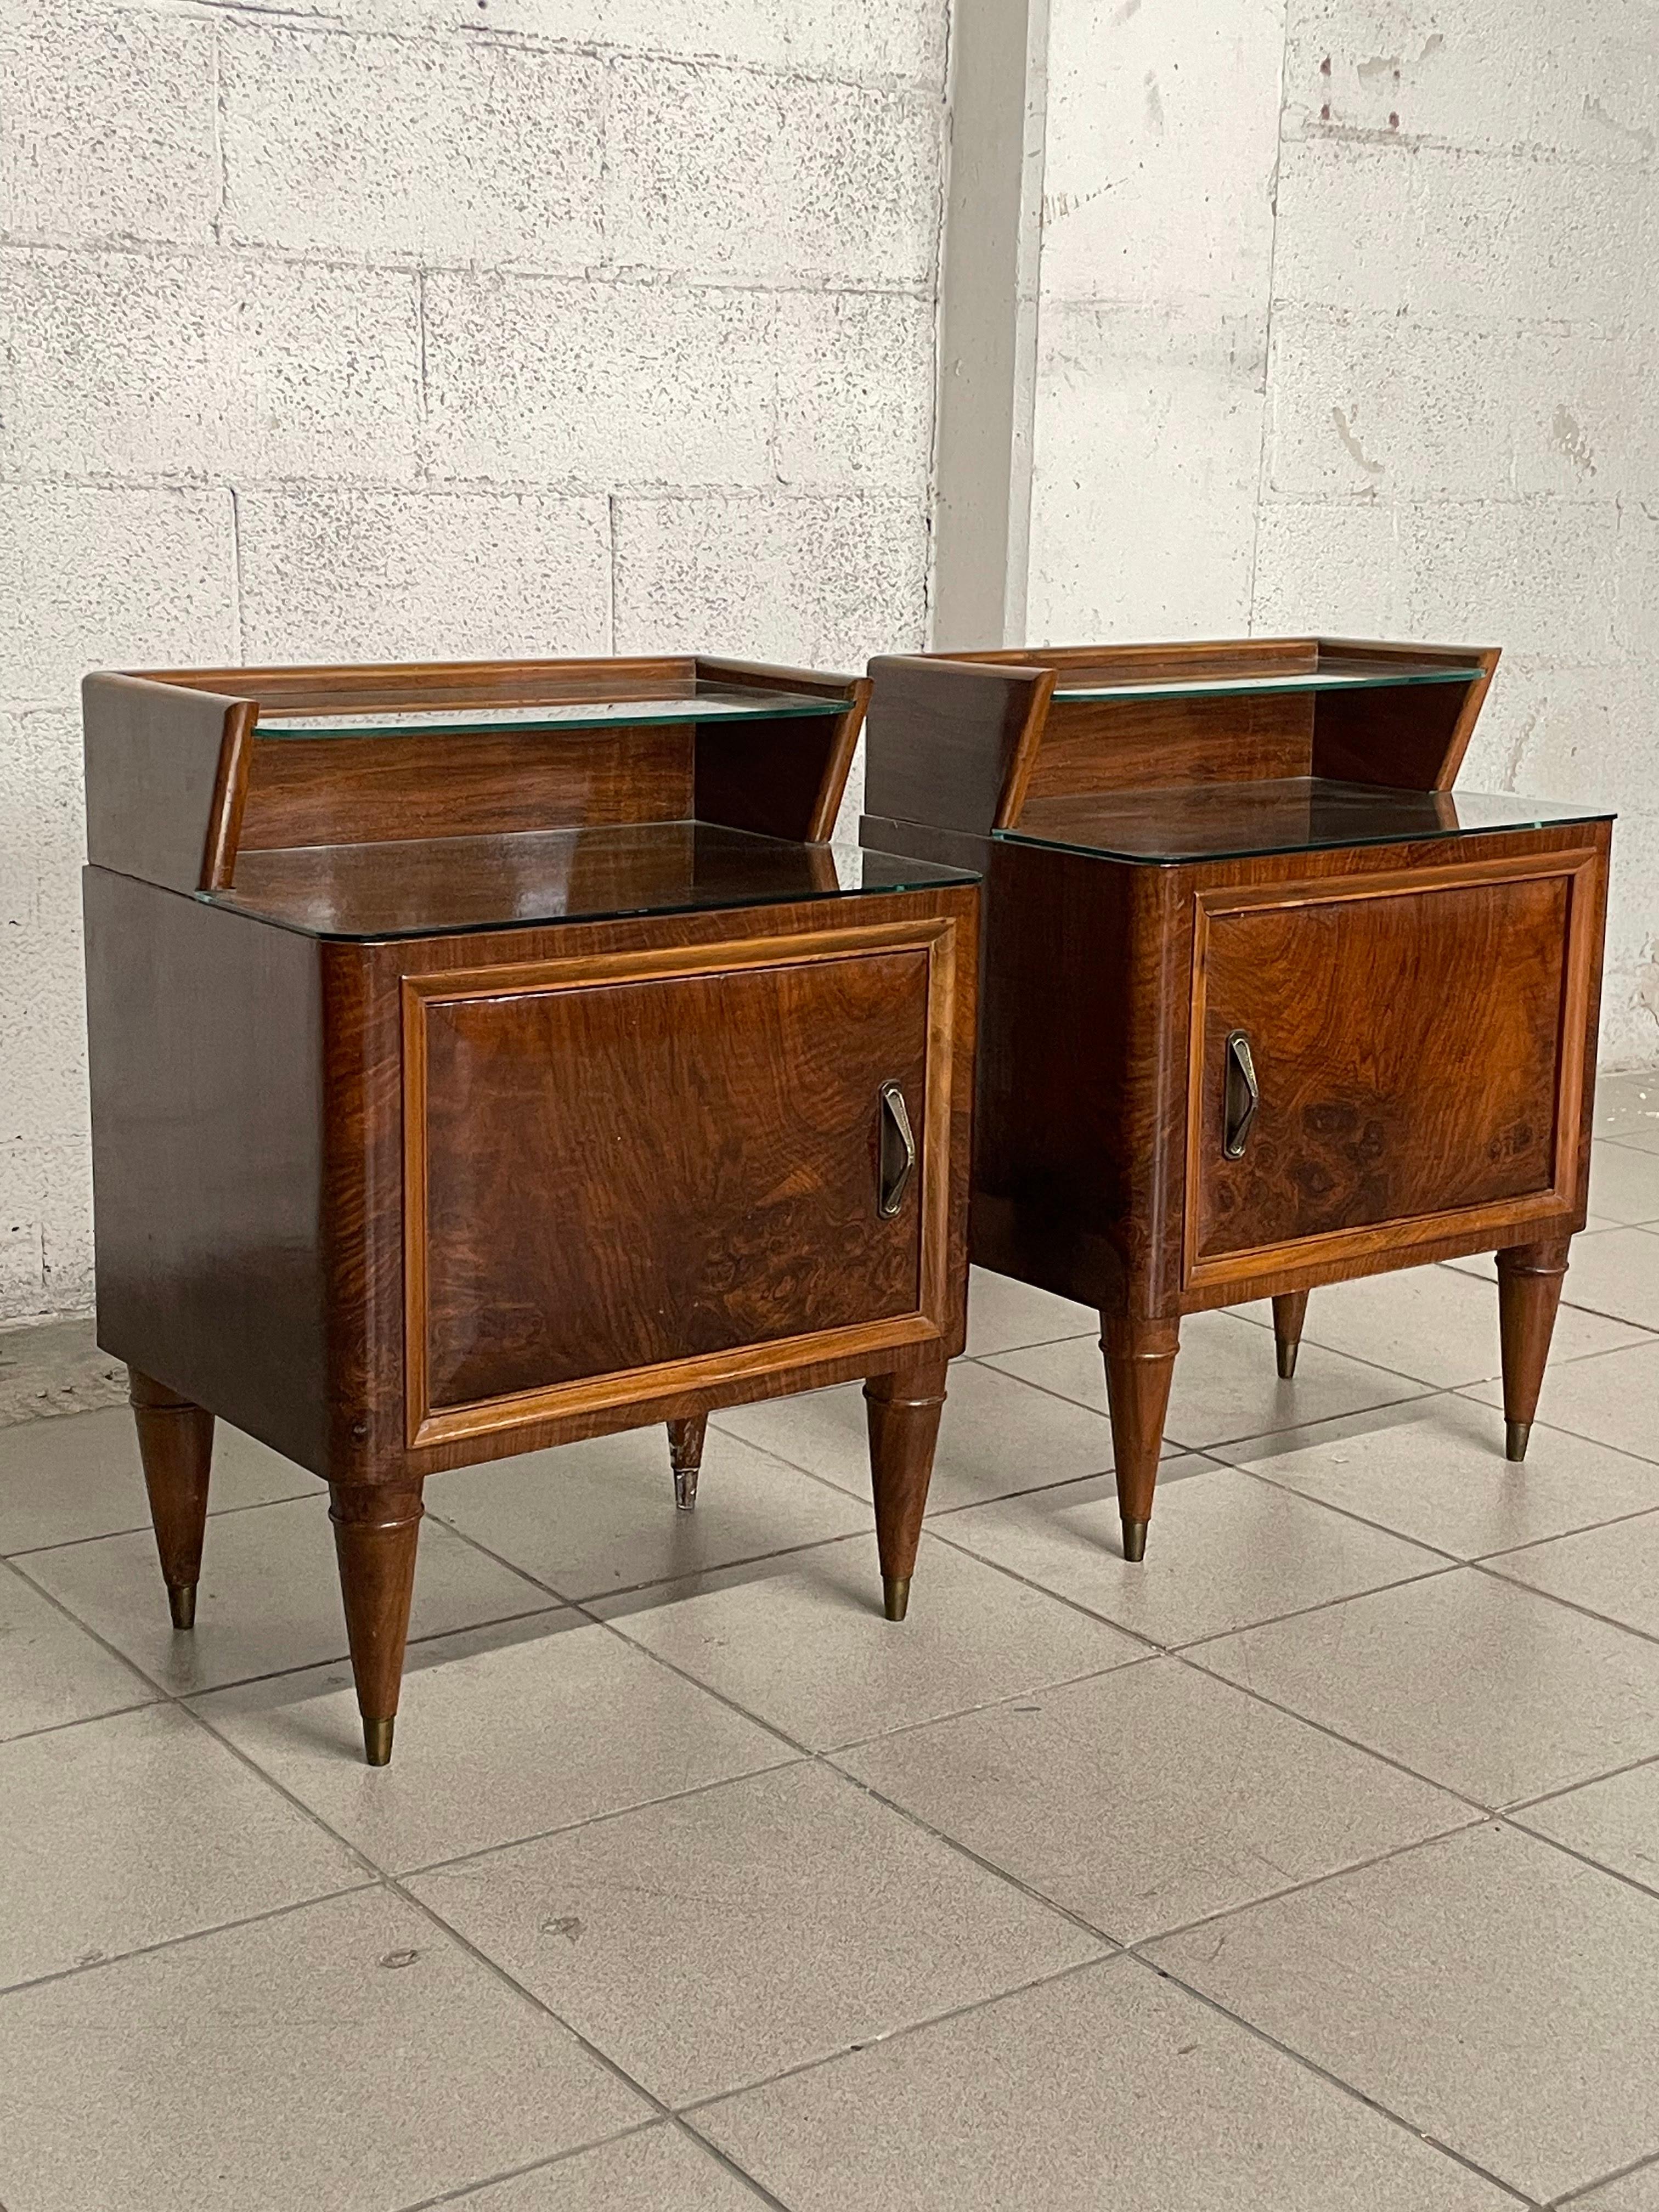 Pair of 1950s bedside tables in mahogany wood with cone feet and brass ferrules.

Glass top and shelf.

The maximum height of the nightstand (shelf height) is 66 cm that of the top is 54 cm.

They have not been restored as they are in good vintage